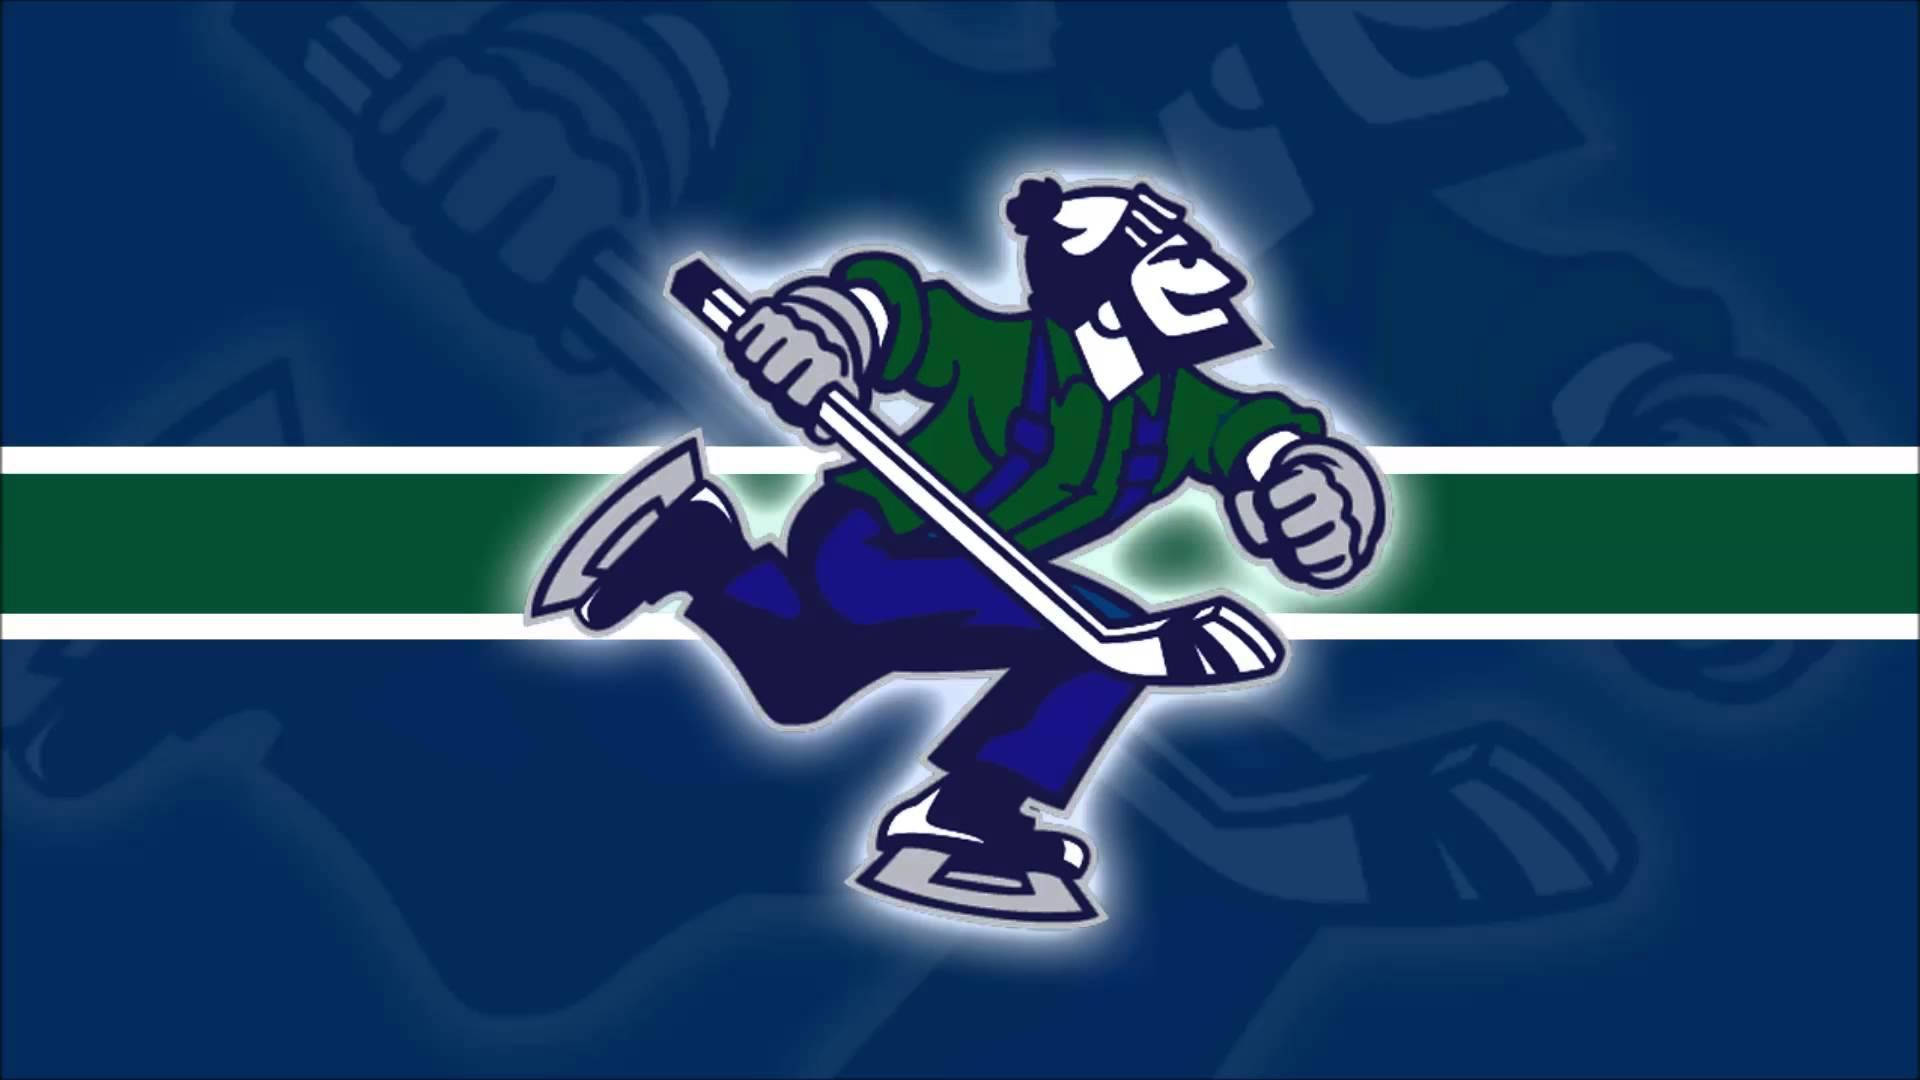 193 Vancouver Canucks Images, Stock Photos & Vectors